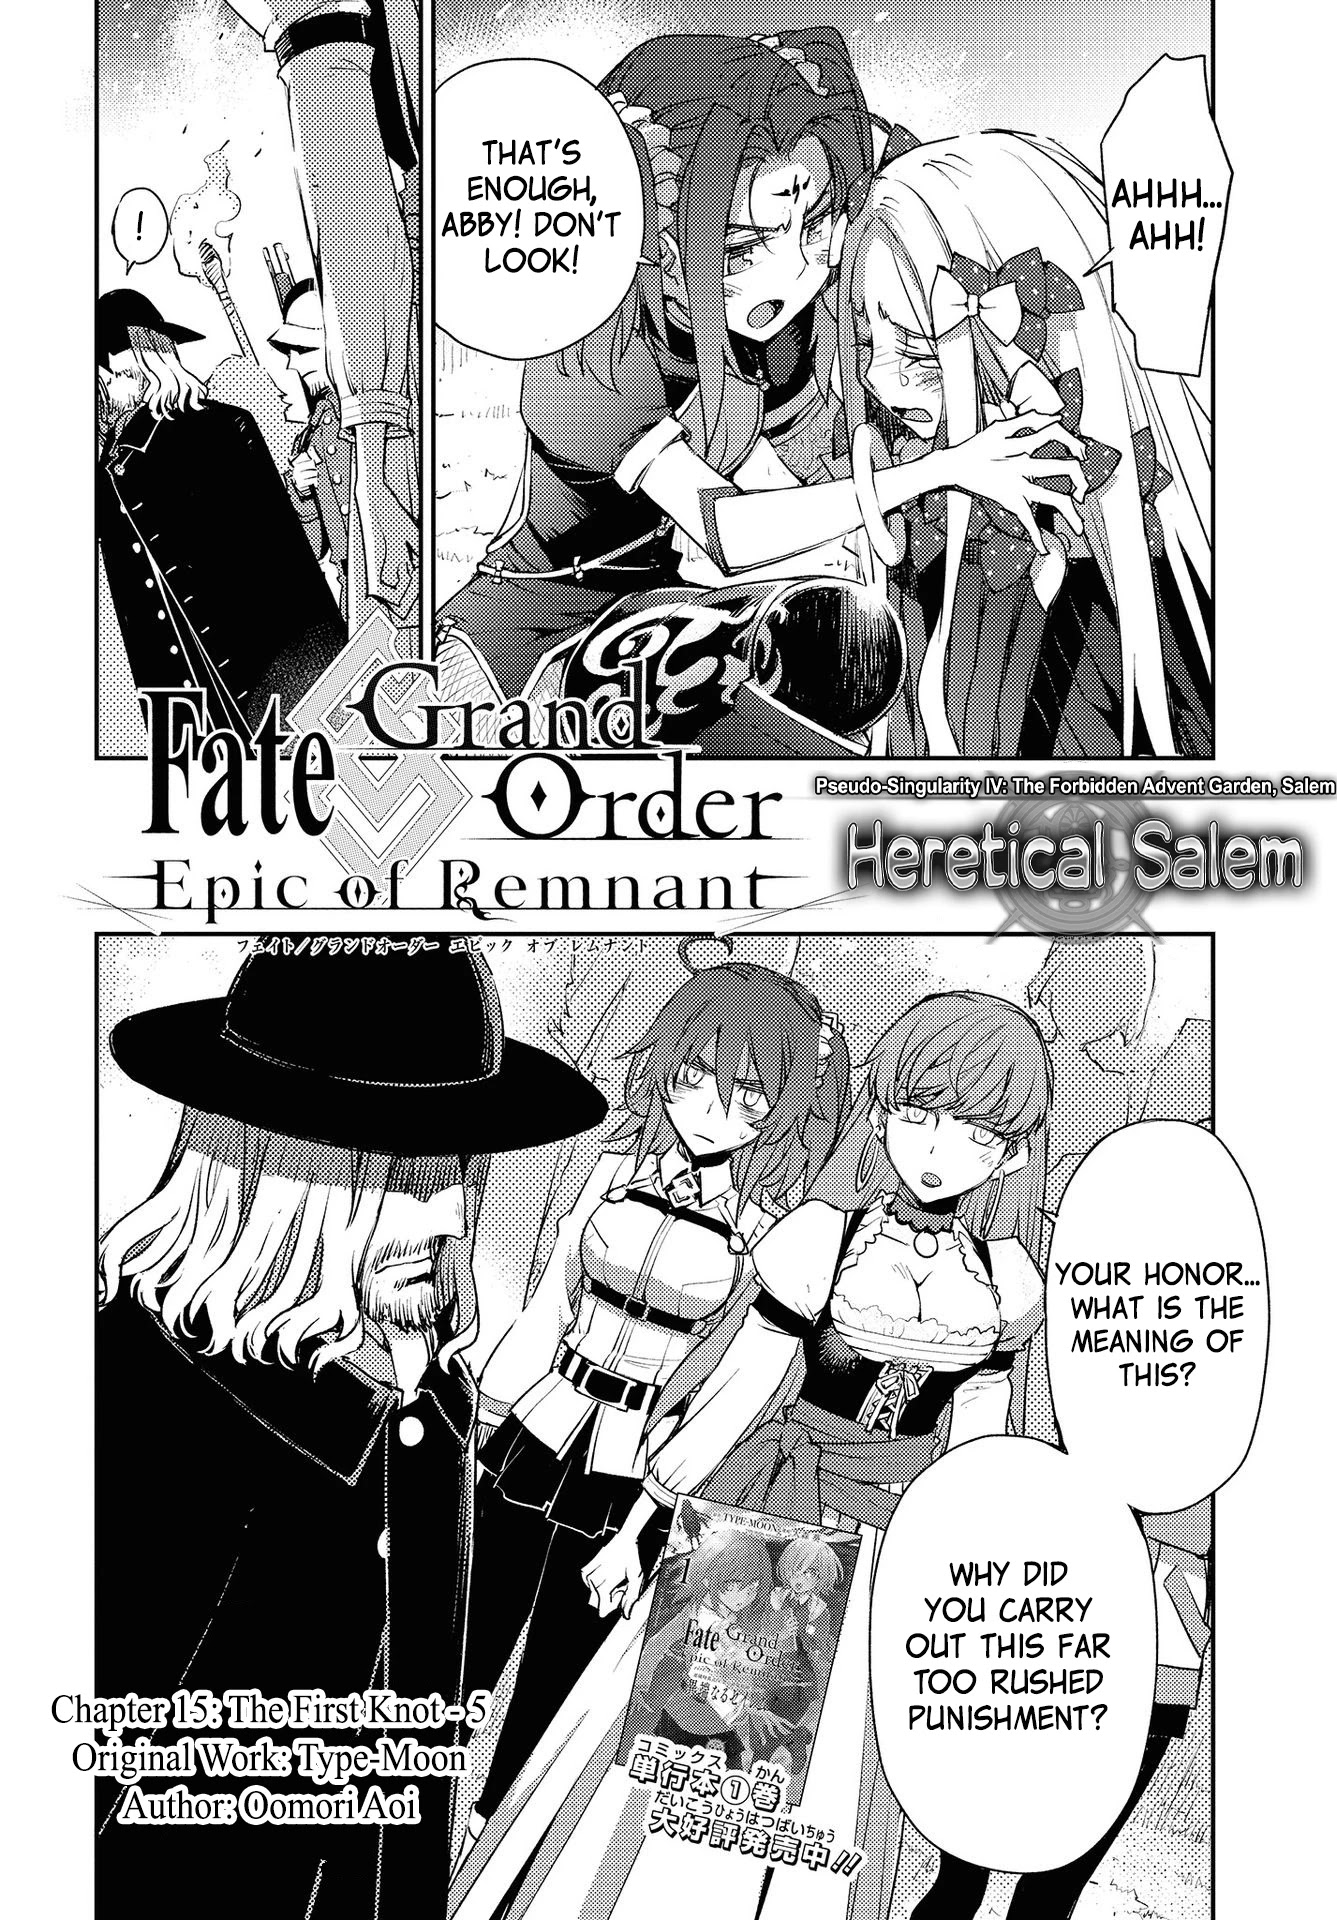 Fate/grand Order: Epic Of Remnant - Subspecies Singularity Iv: Taboo Advent Salem: Salem Of Heresy Chapter 15: The First Knot - 5 - Picture 2